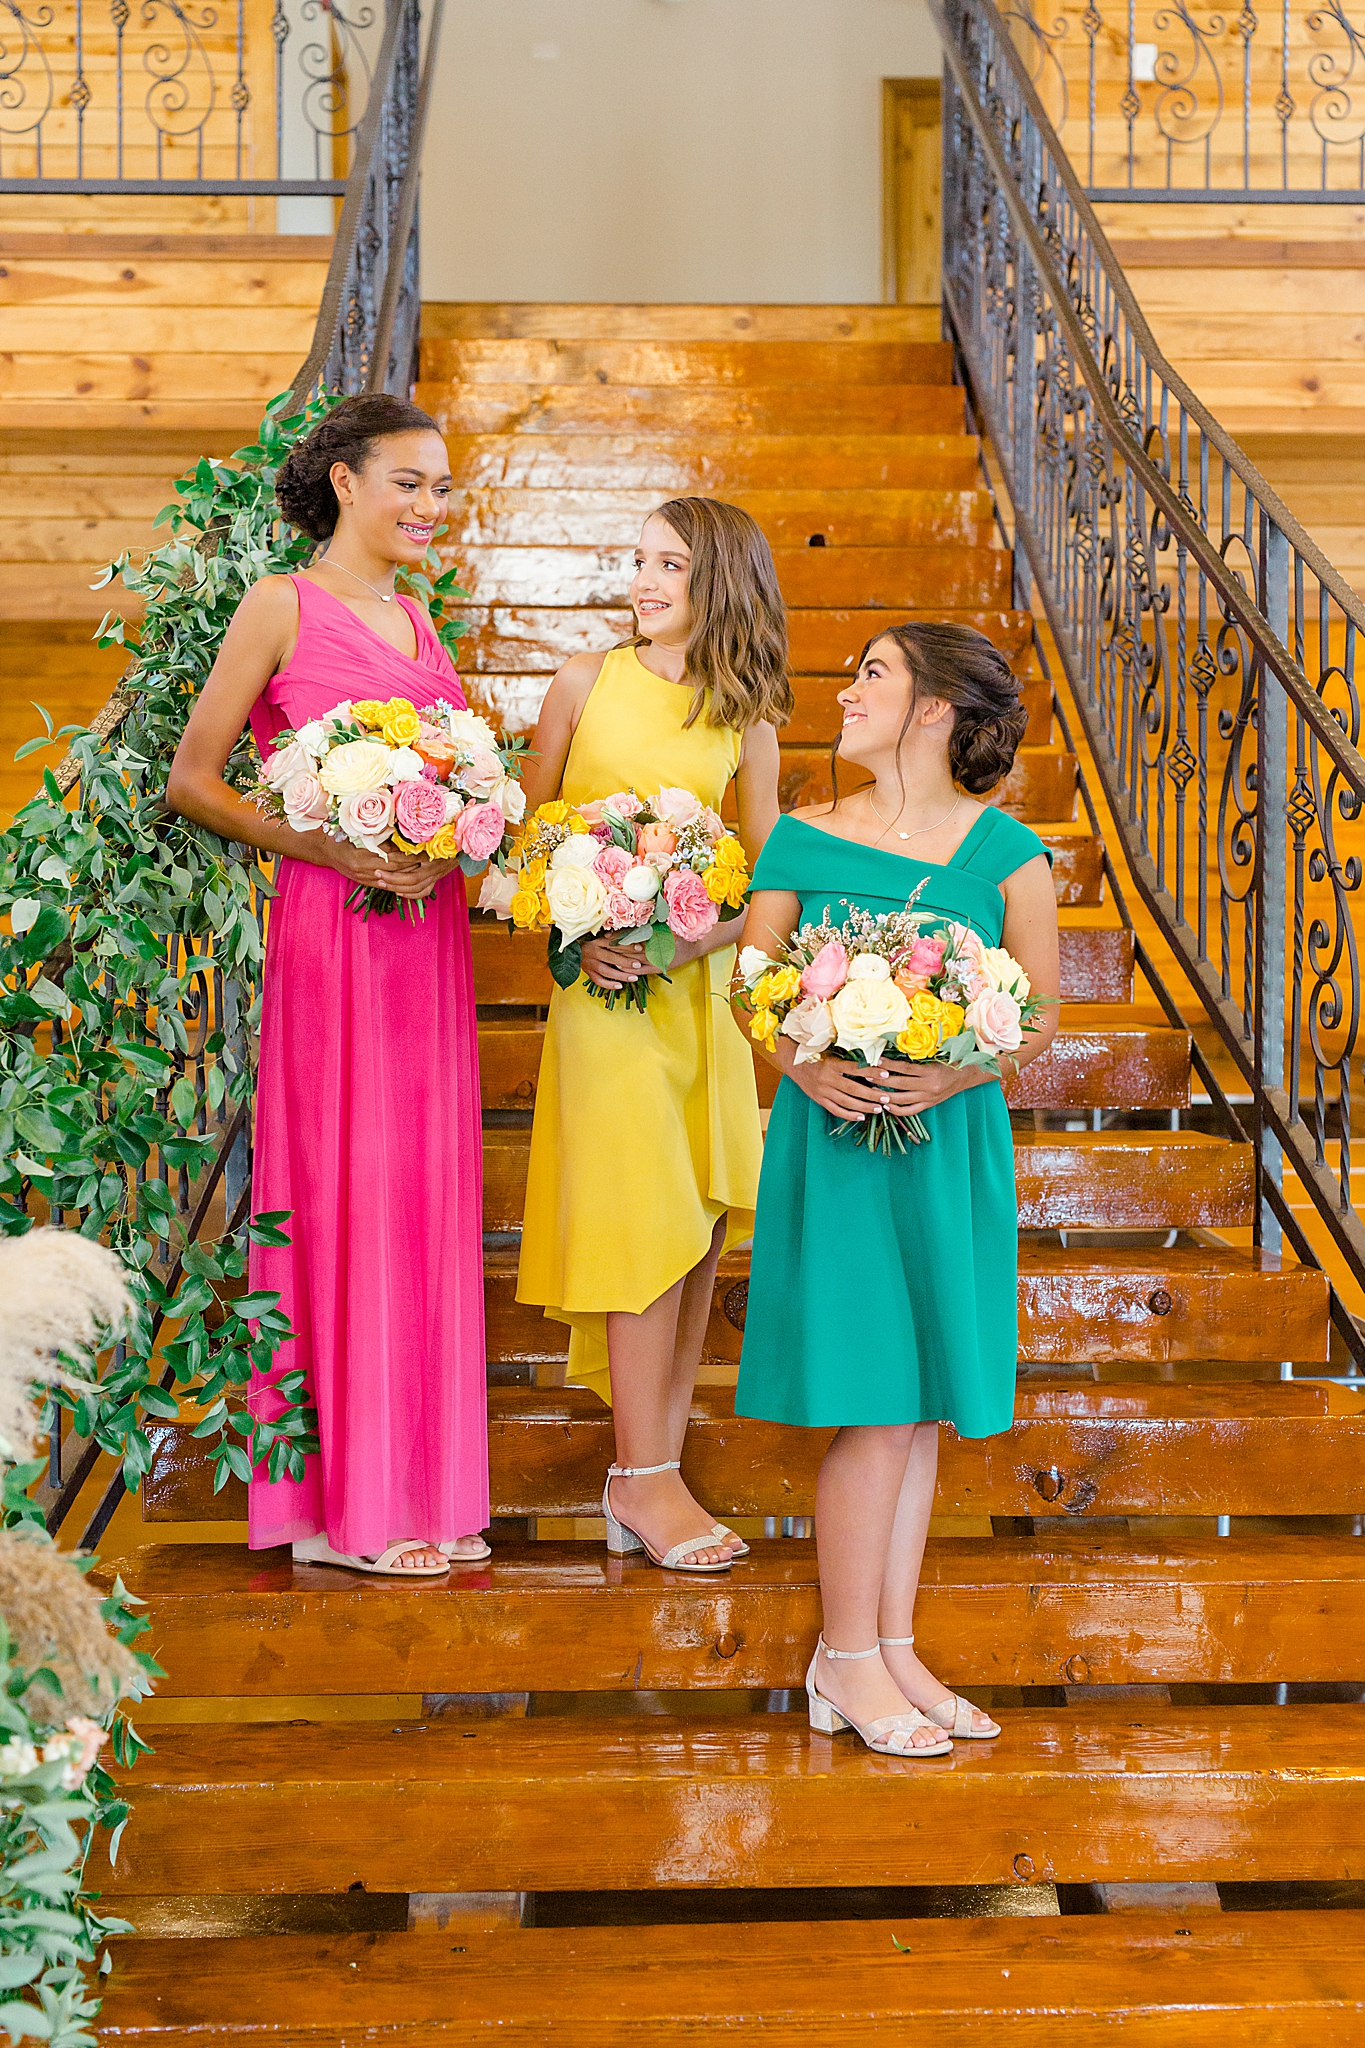 Junior Bridesmaids Styled Shoot for The Southern Social